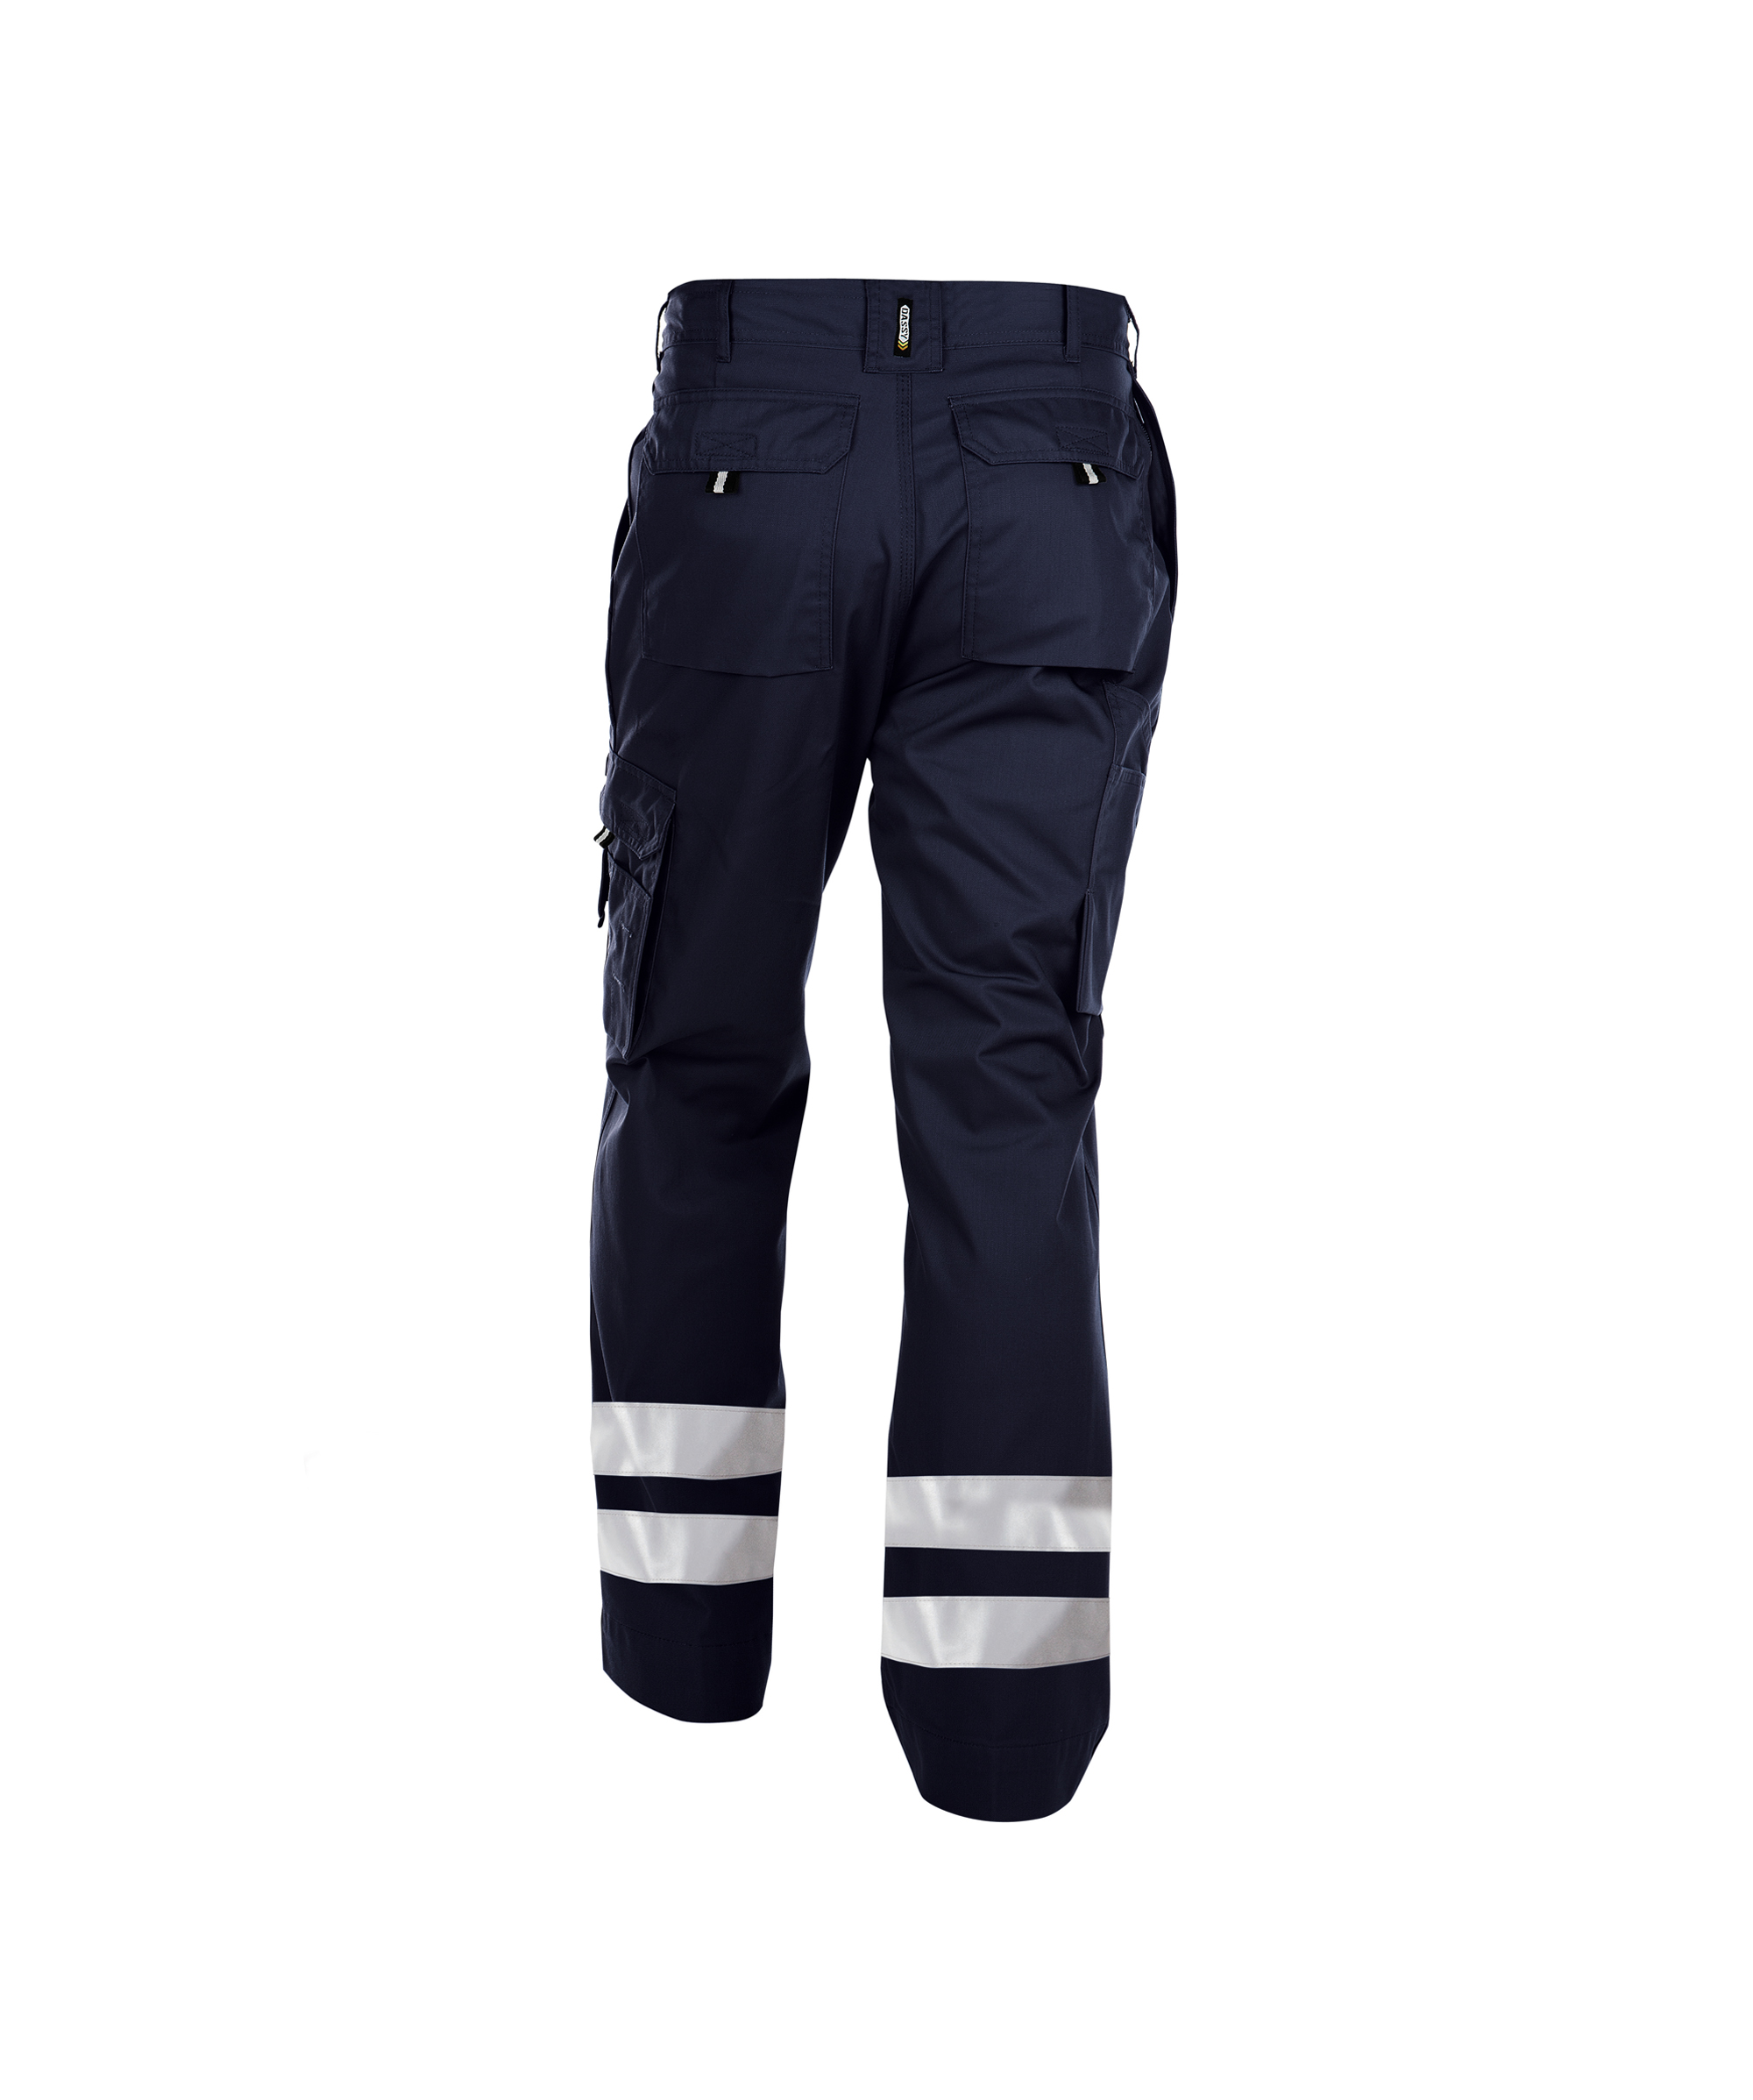 vegas_work-trousers-with-reflective-tape_navy_back.jpg